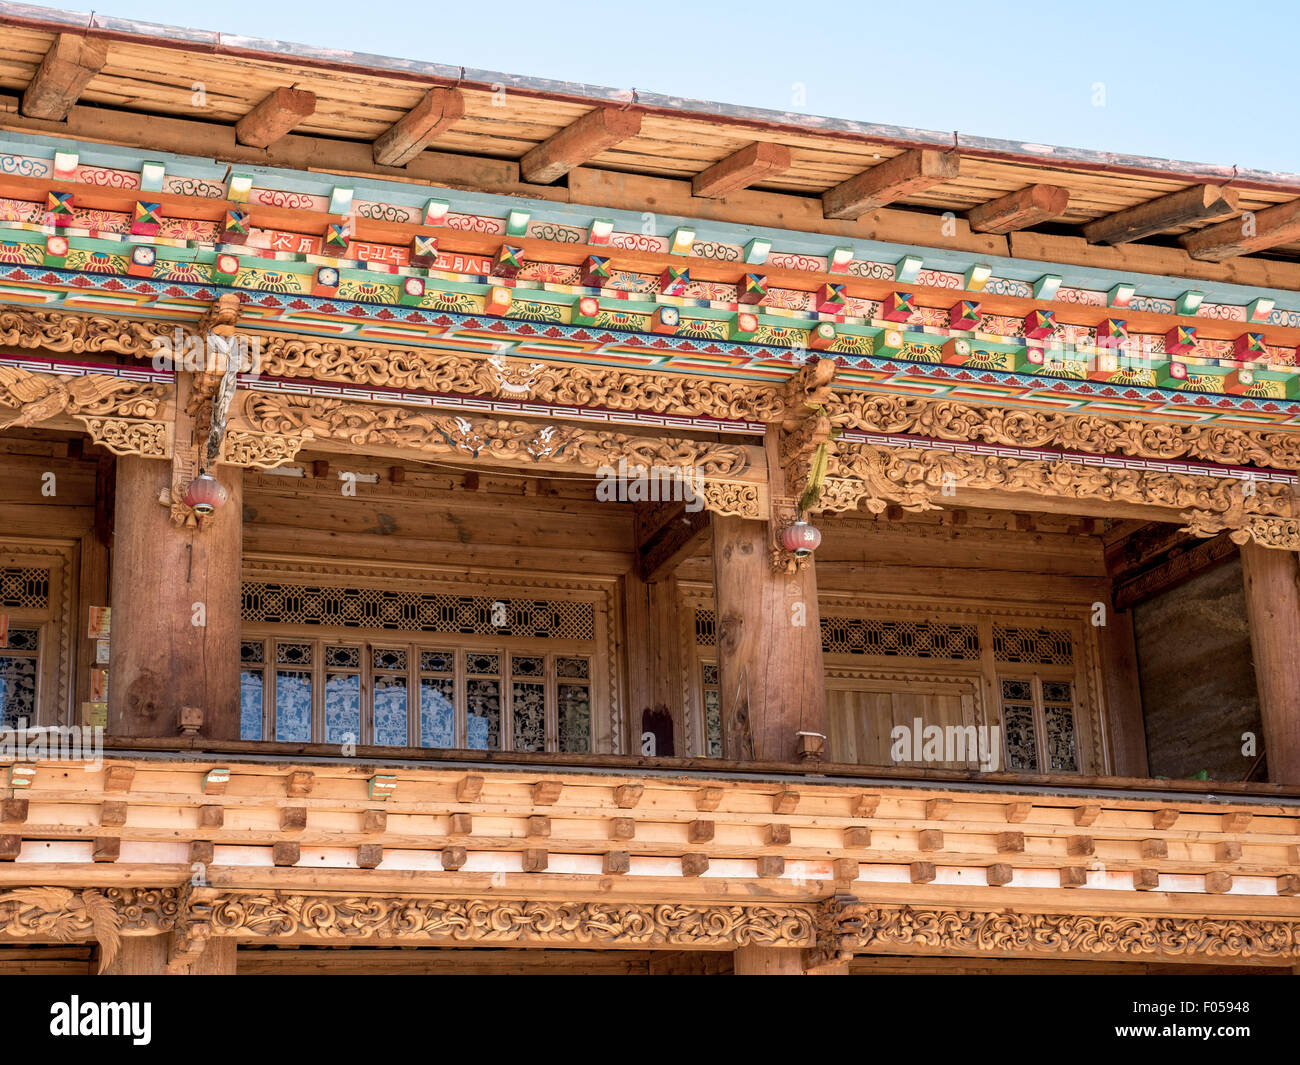 The Wood Carving On A Traditional Tibetan Style Farmhouse In The Yunnan Province Of China Near Shangri-La Stock Photo